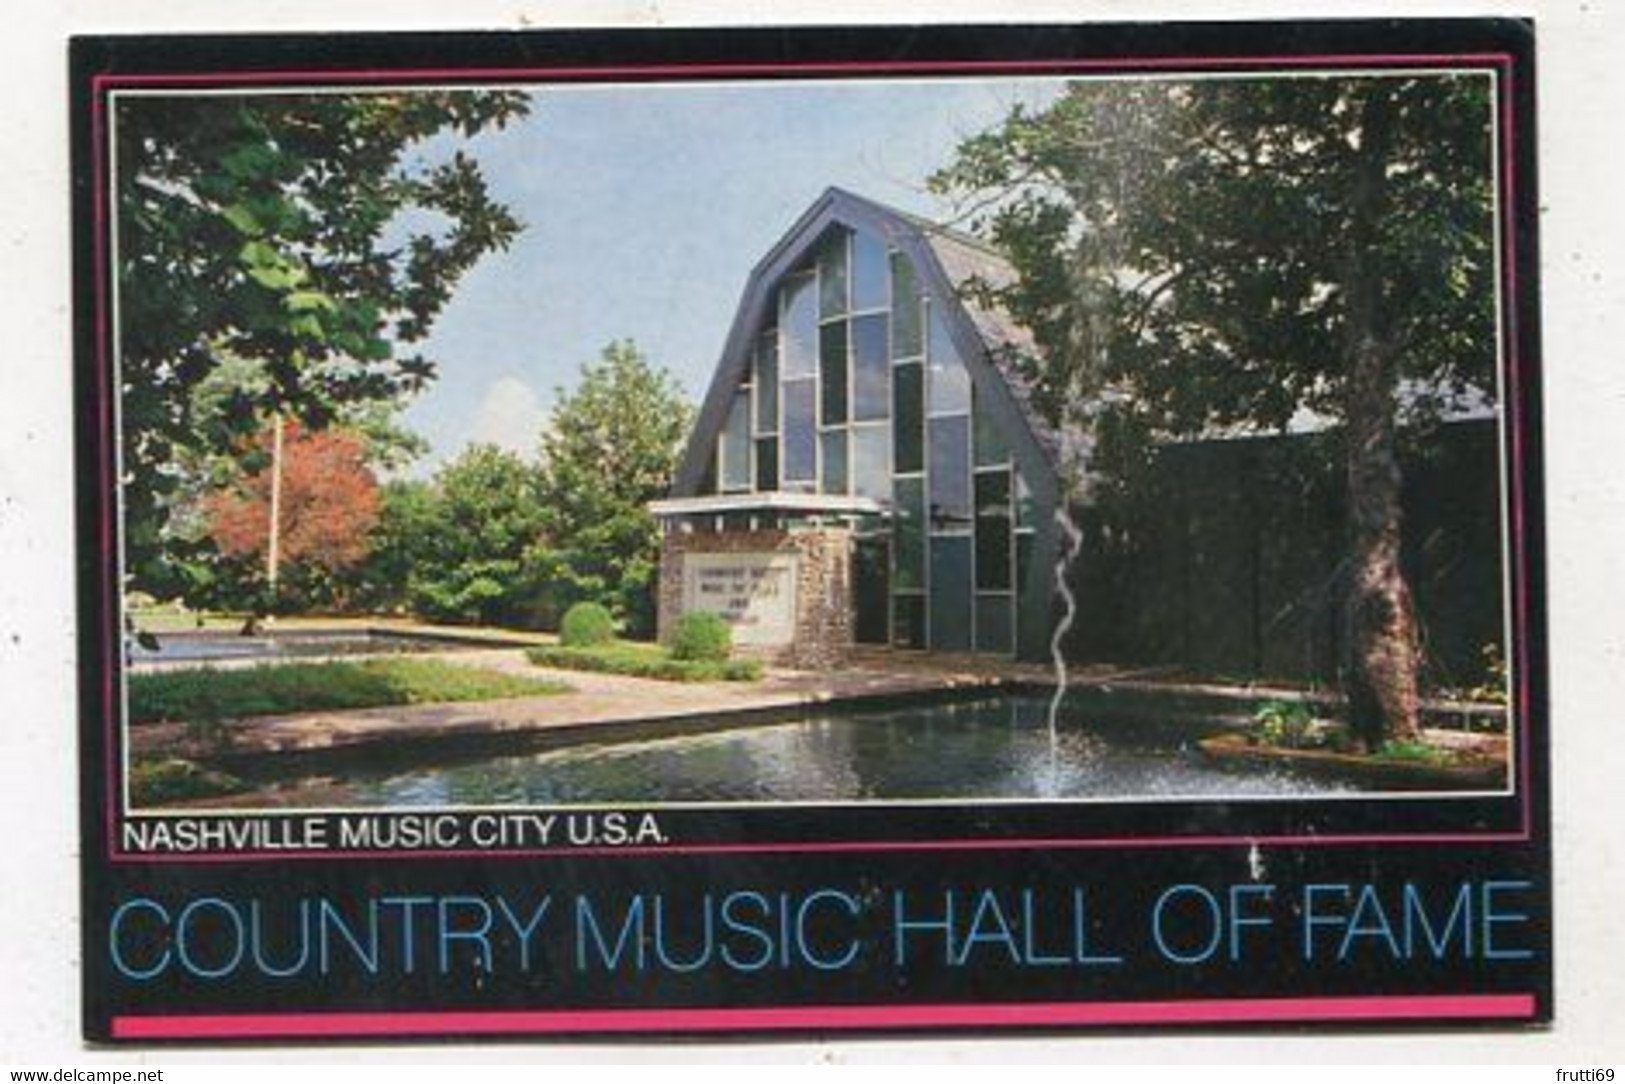 AK 064063 USA - Tennessee - Nashville - Country Music Hall Of Fame - Nashville